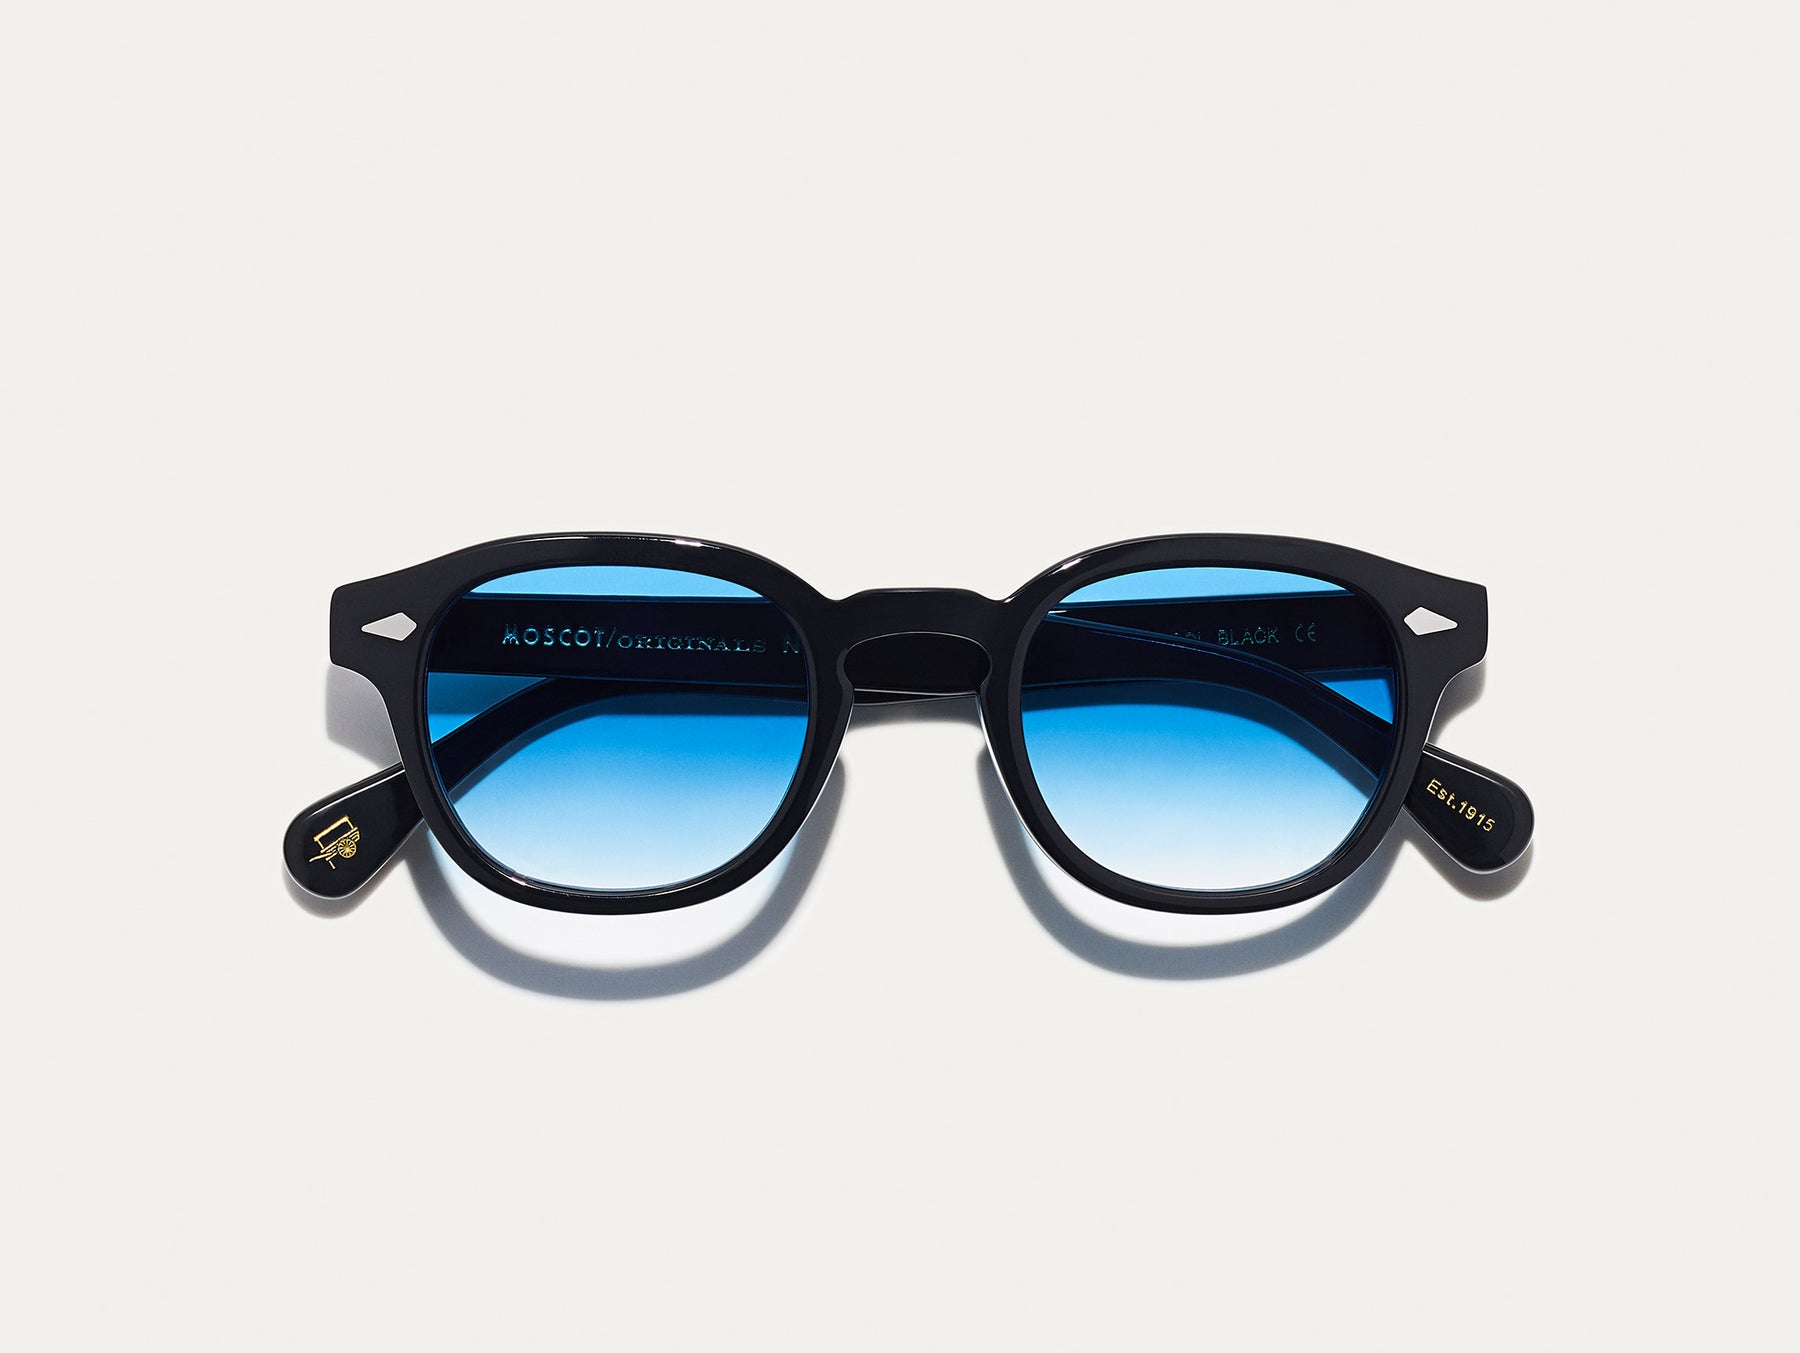 The LEMTOSH Black with Broadway Blue Fade Tinted Lenses